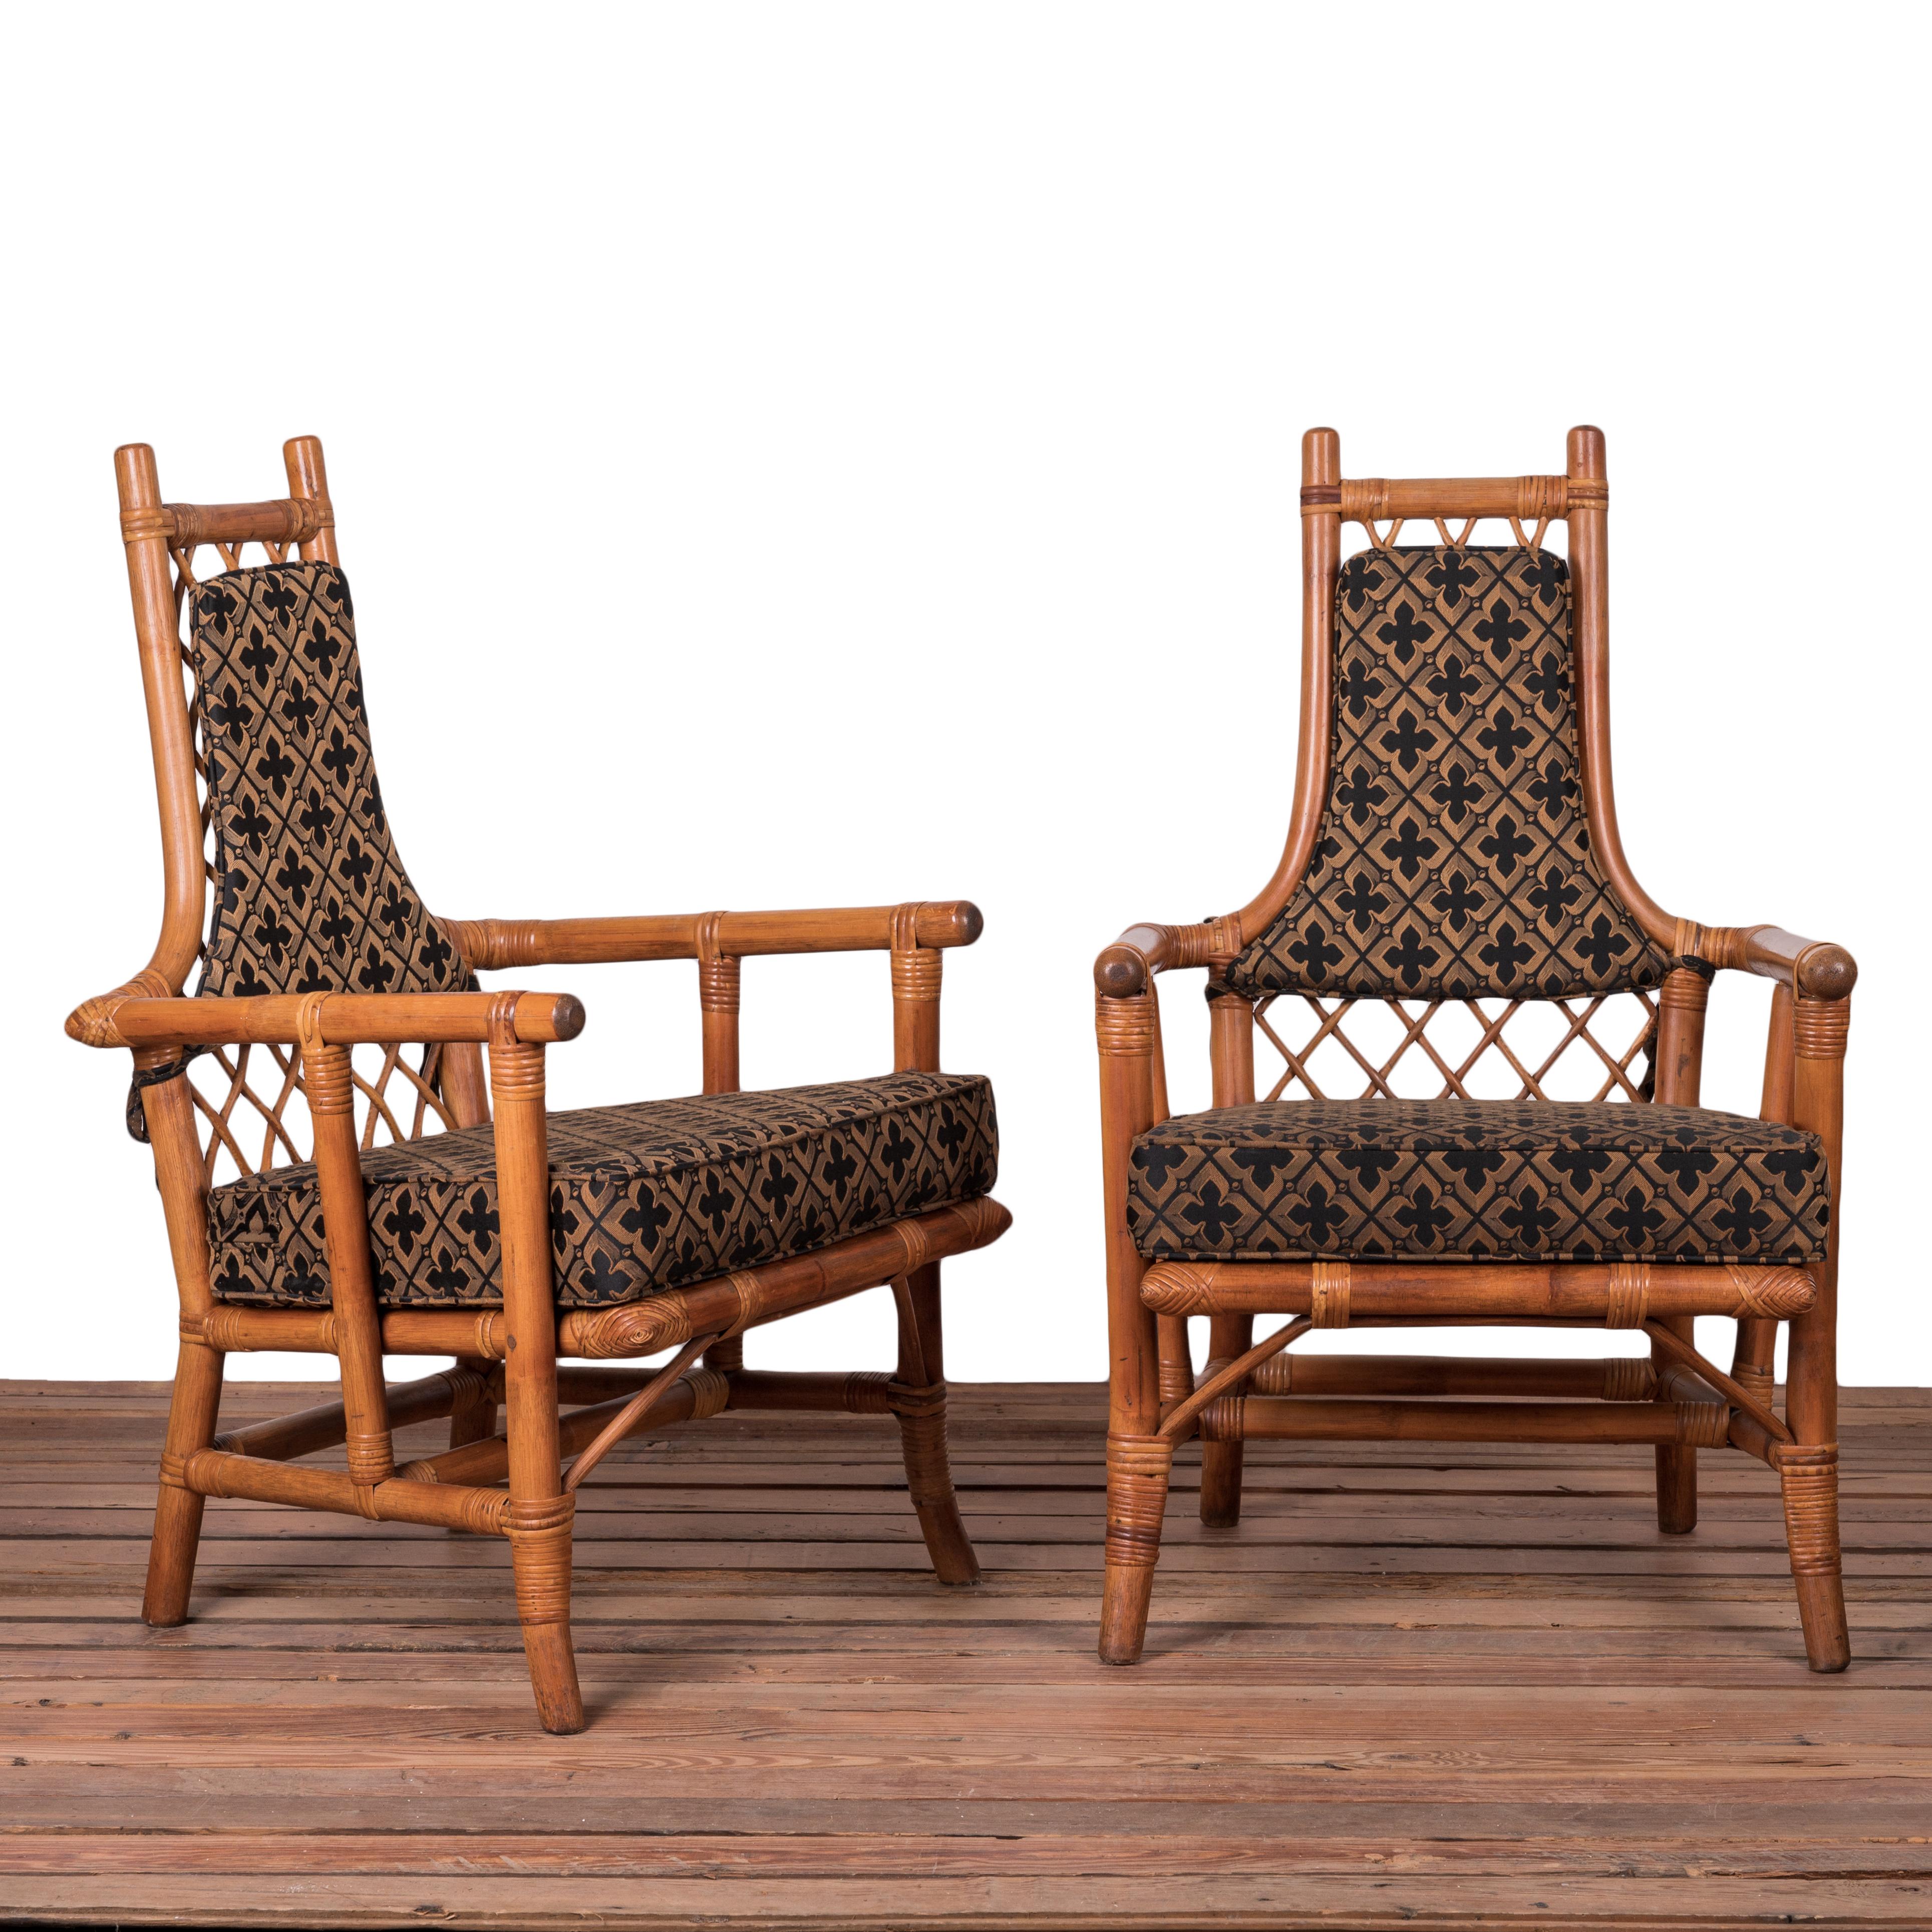 A set of six restored bamboo dining chairs designed by Tommi Parzinger and Henry Olko for Willow & Reed, Inc., circa 1955. 

23 inches wide by 24 ½ inches deep by 37 inches tall; seat height 17 inches; arm height 23 inches

